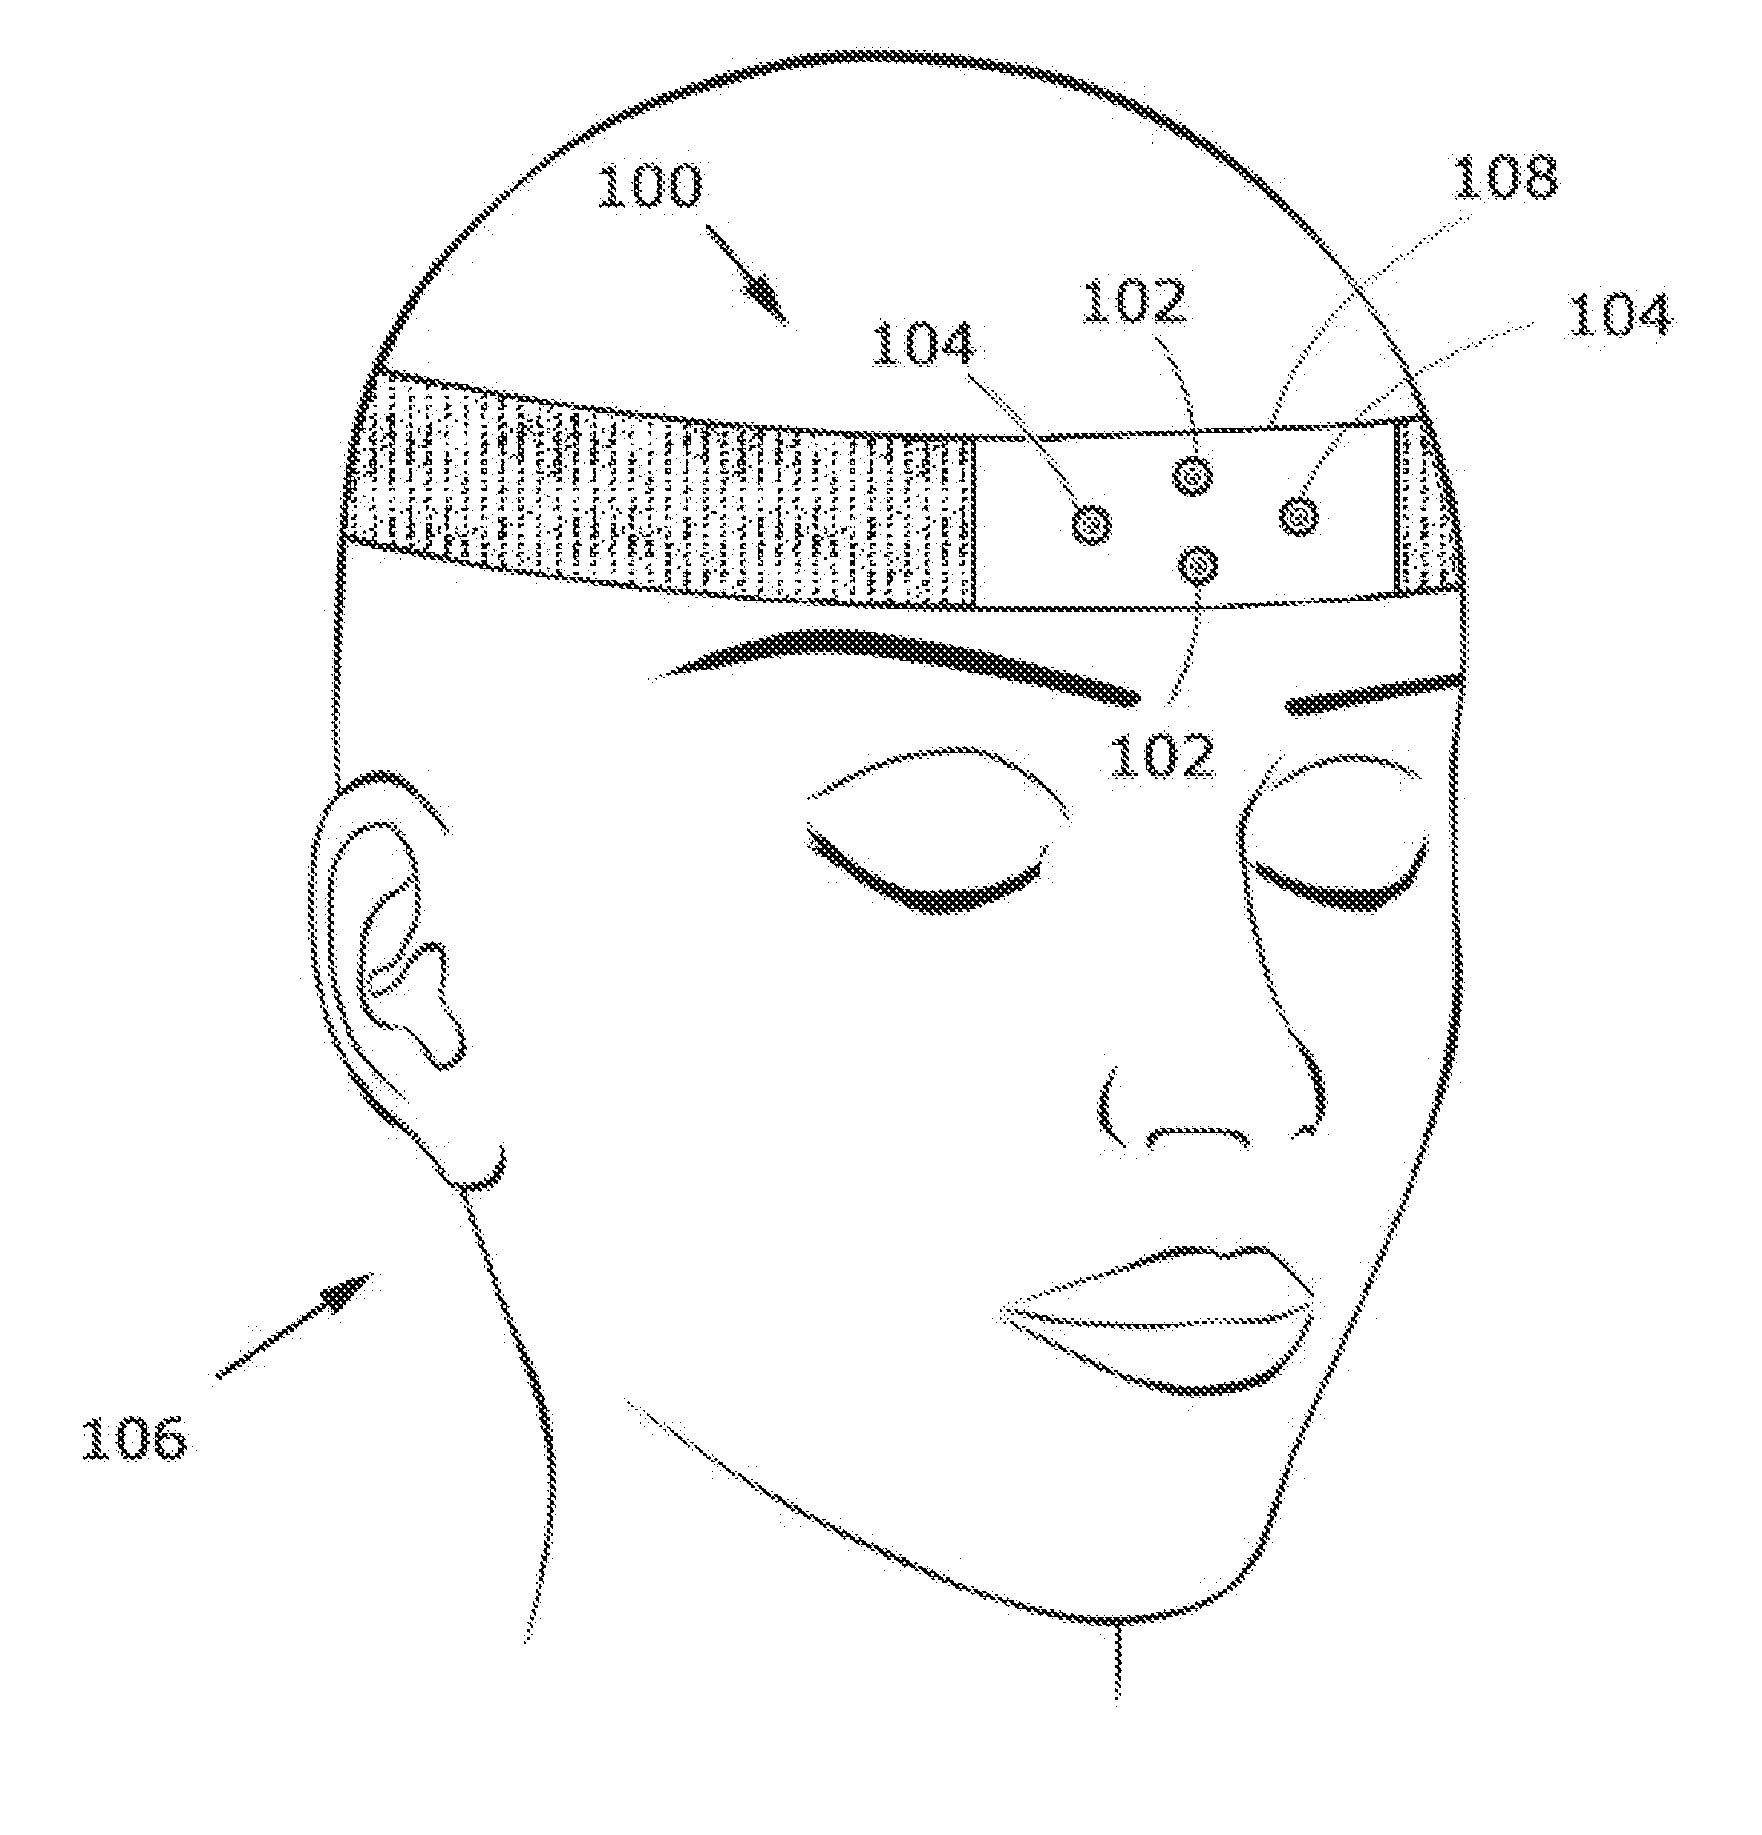 Dual-Purpose Sleep-Wearable Headgear for Monitoring and Stimulating the Brain of a Sleeping Person